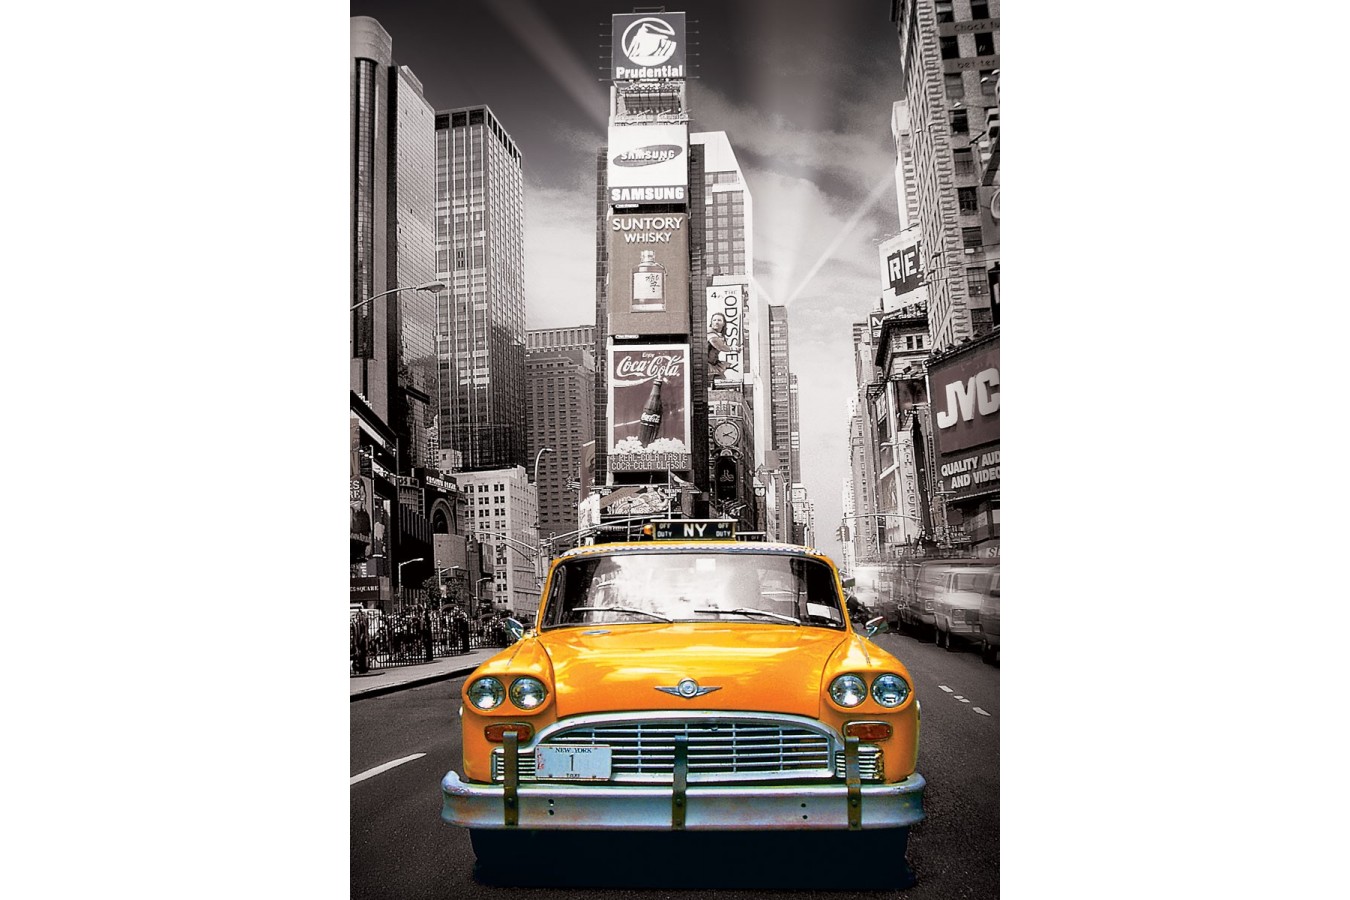 Puzzle Eurographics - New York Yellow Cab, 1000 piese (6000-0657)